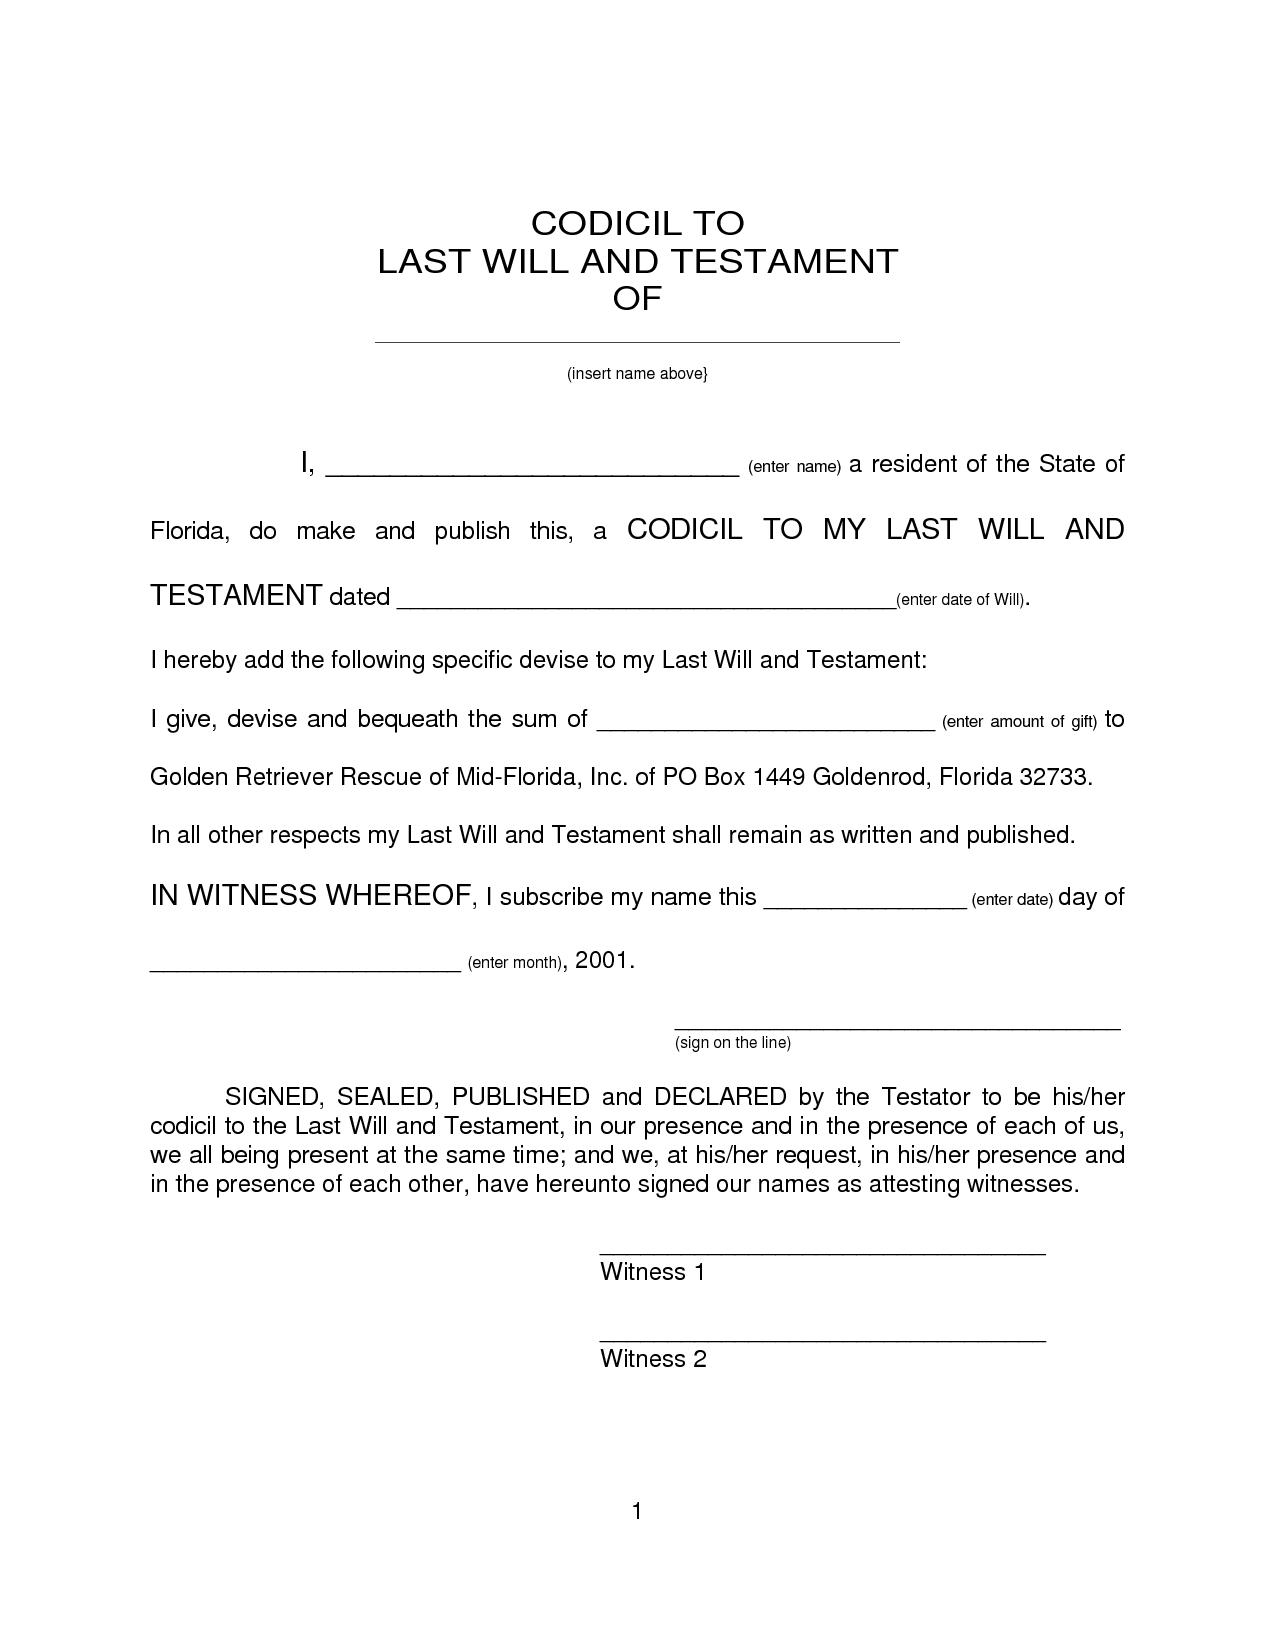 Last Will And Testament Sample Form Free Printable Documents